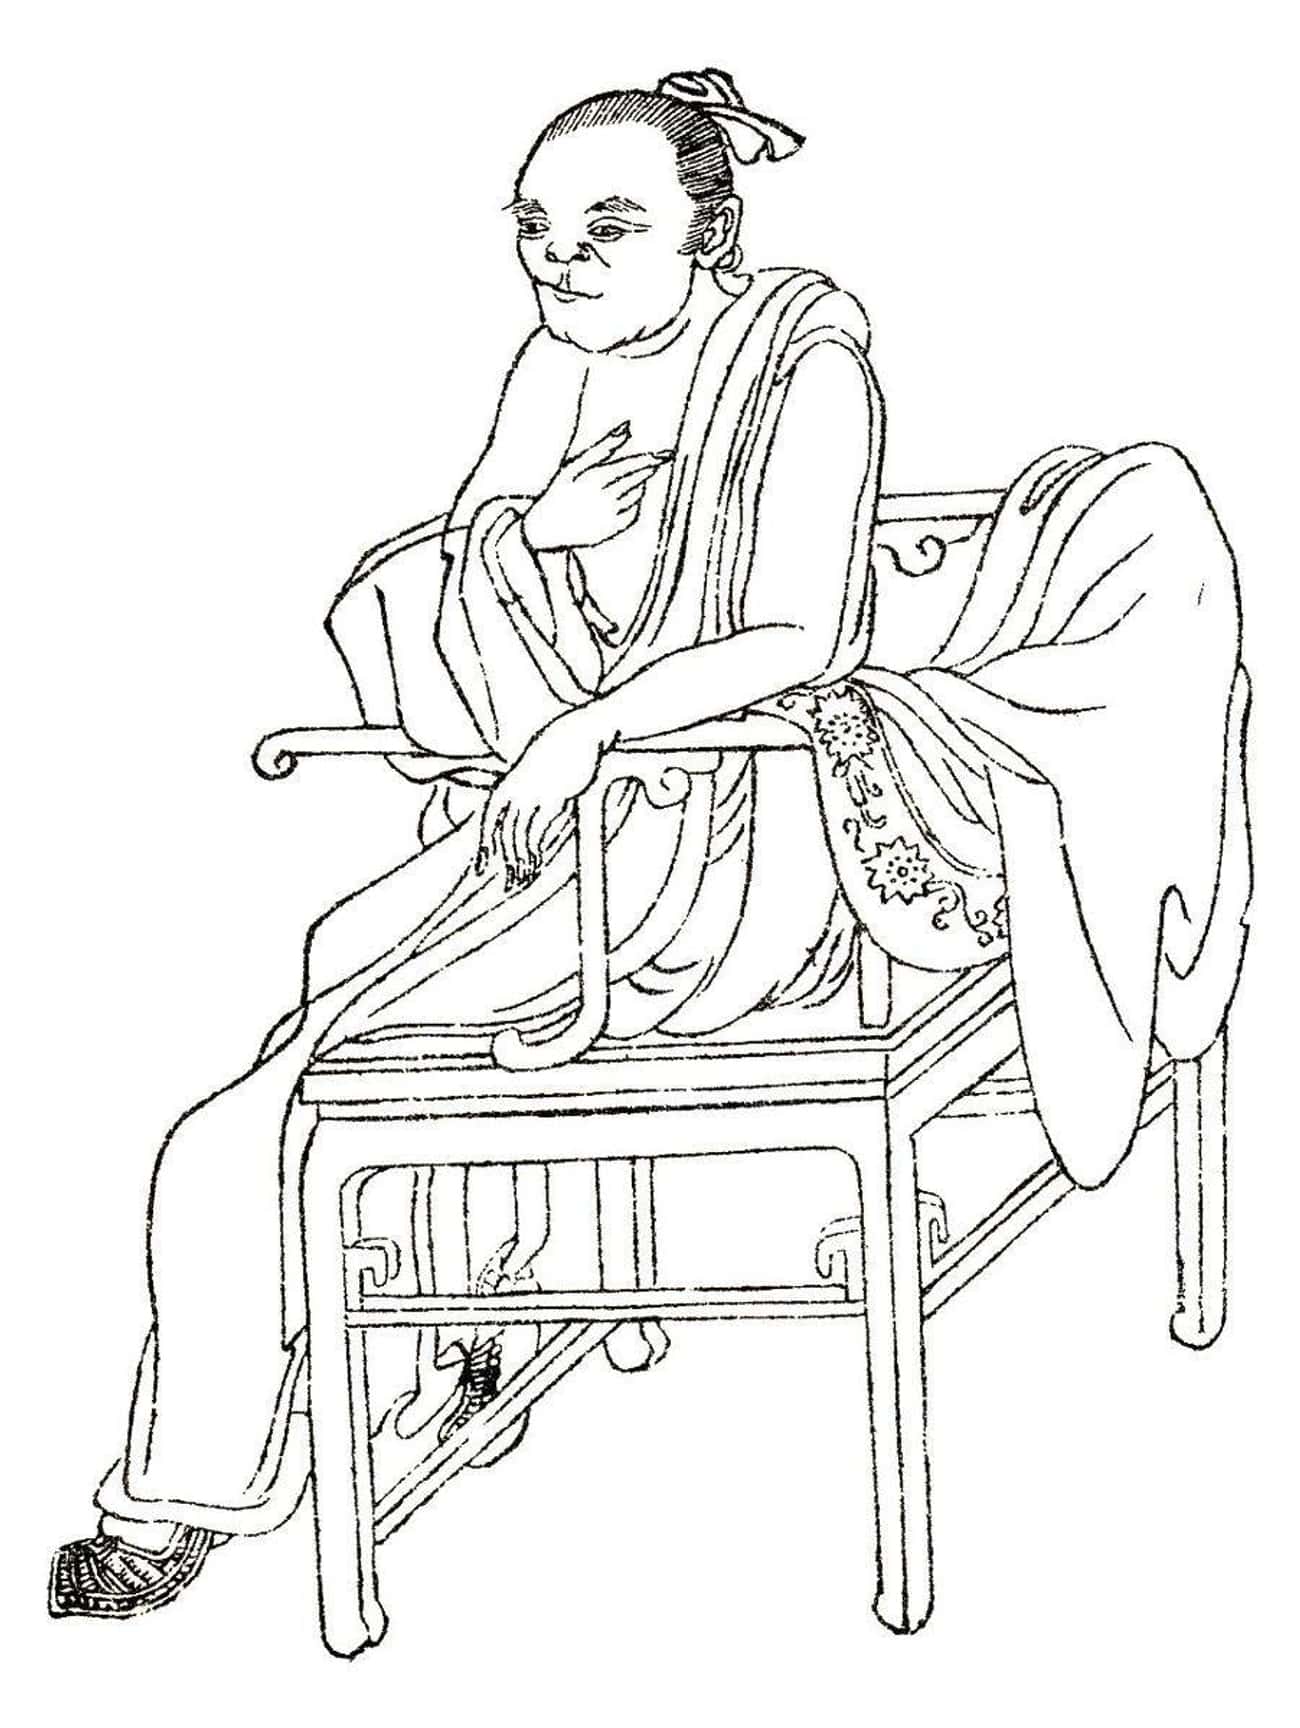 Sima Qian Was One Of China's First Great Historians